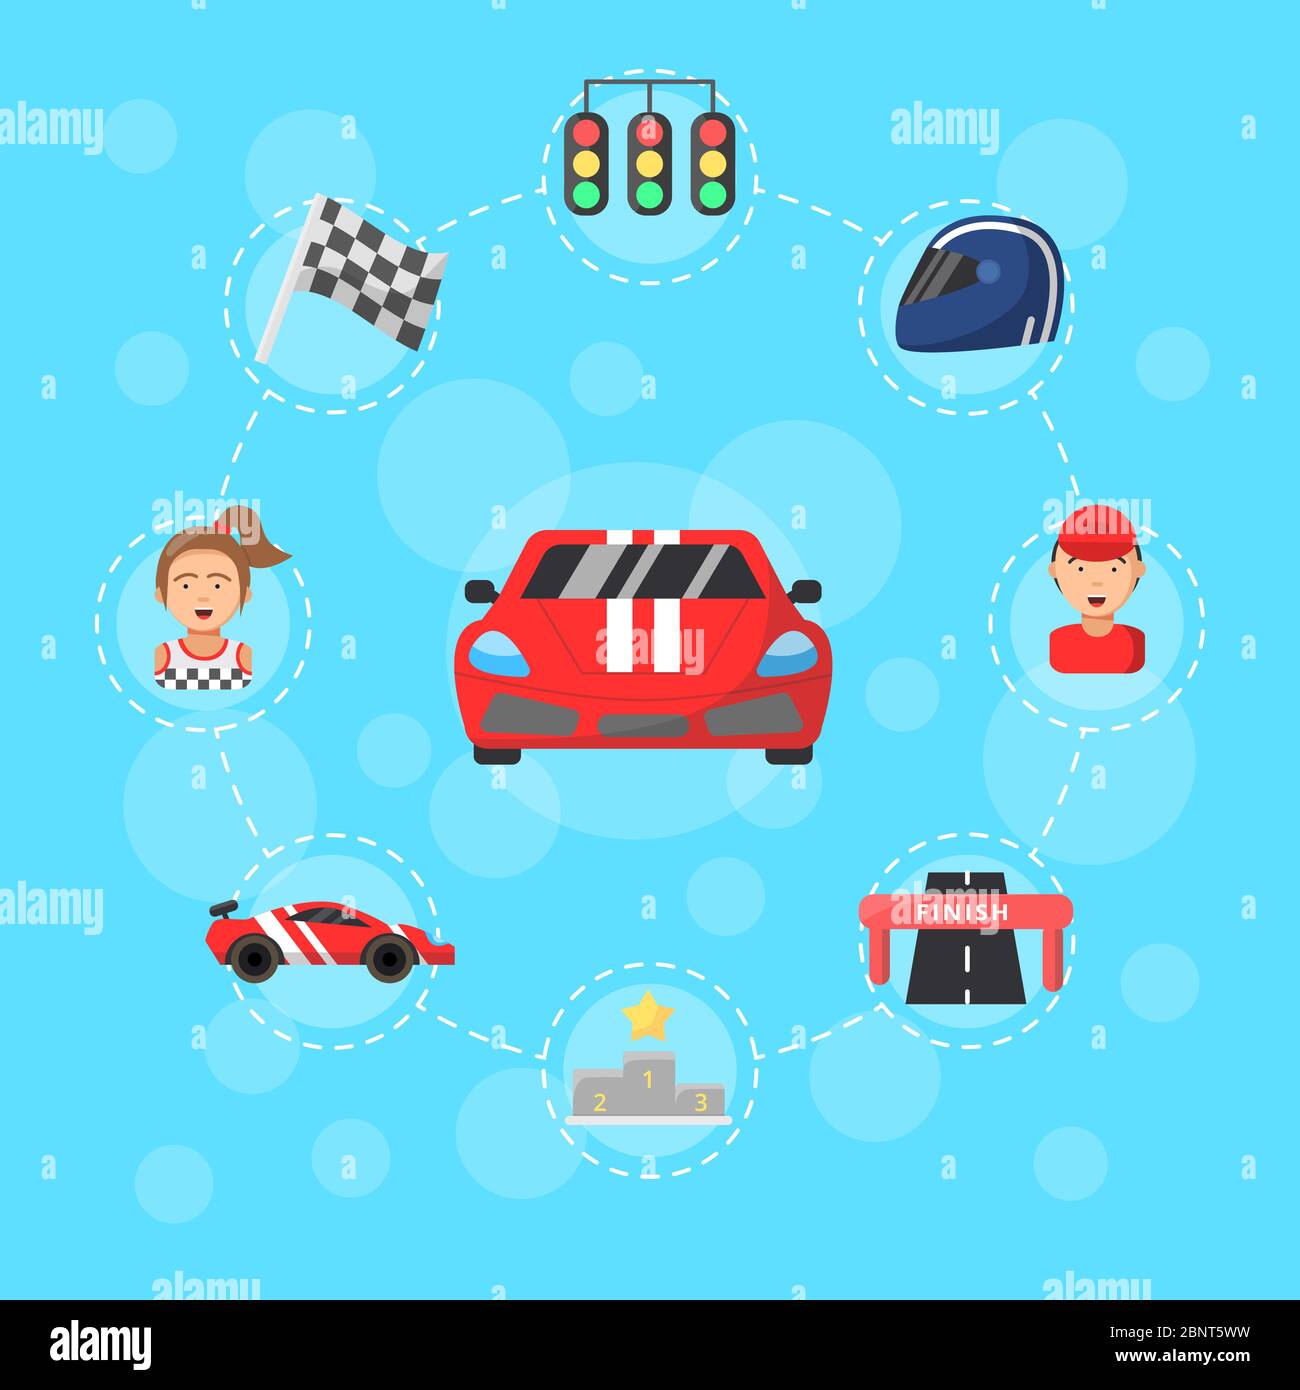 Vector flat car racing icons infographic concept illustration Stock Vector